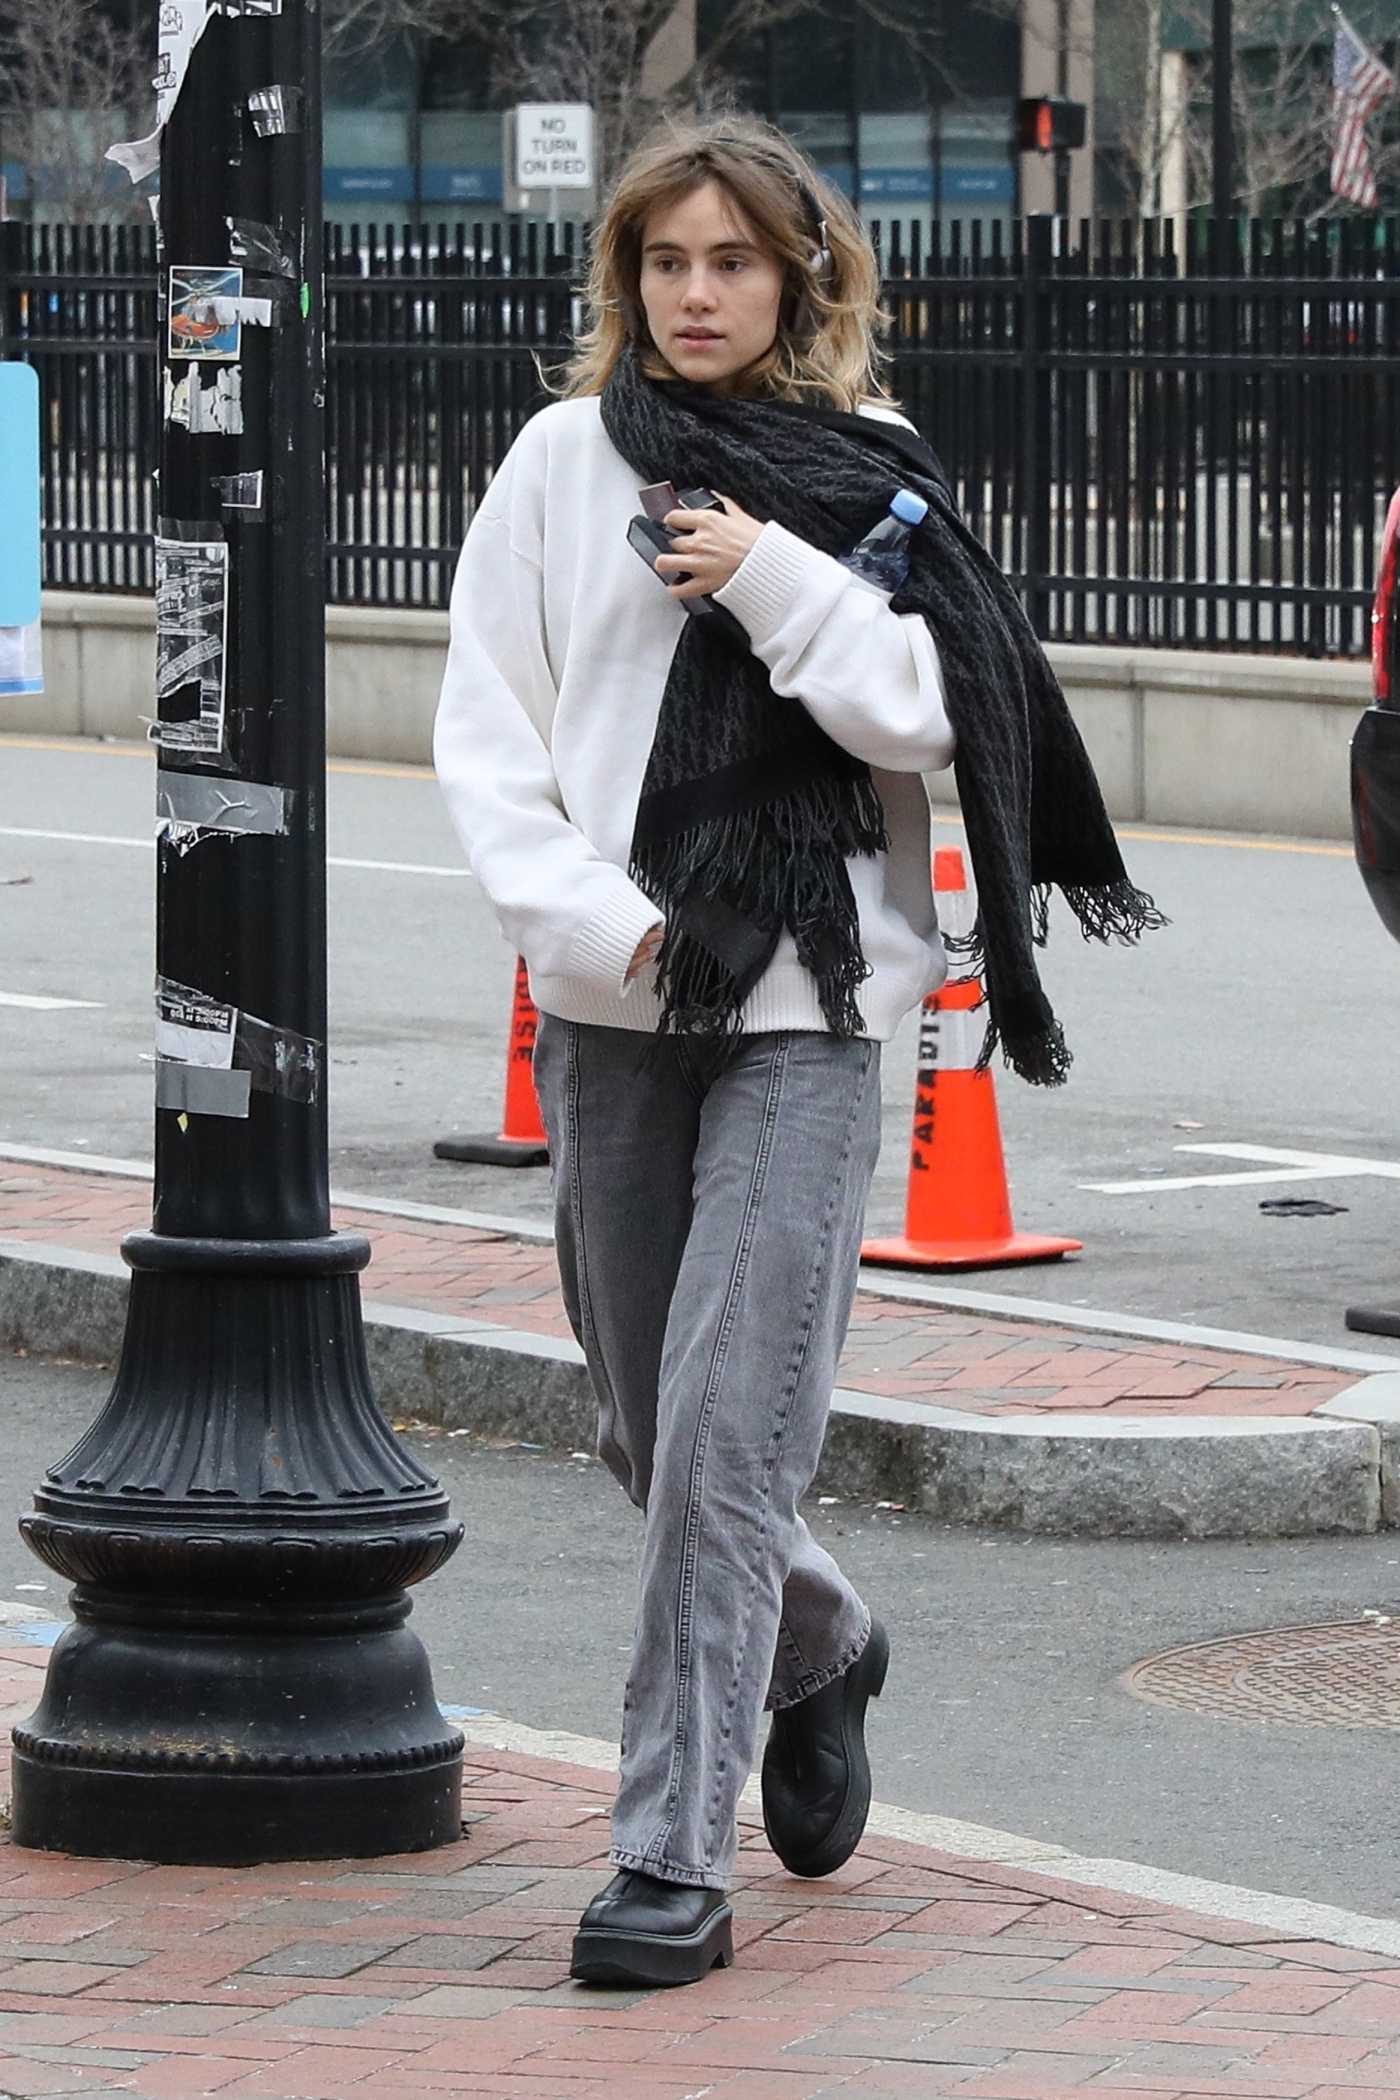 Suki Waterhouse in a White Sweater Arrives at Her Sold-Out Concert in Boston 01/29/2023